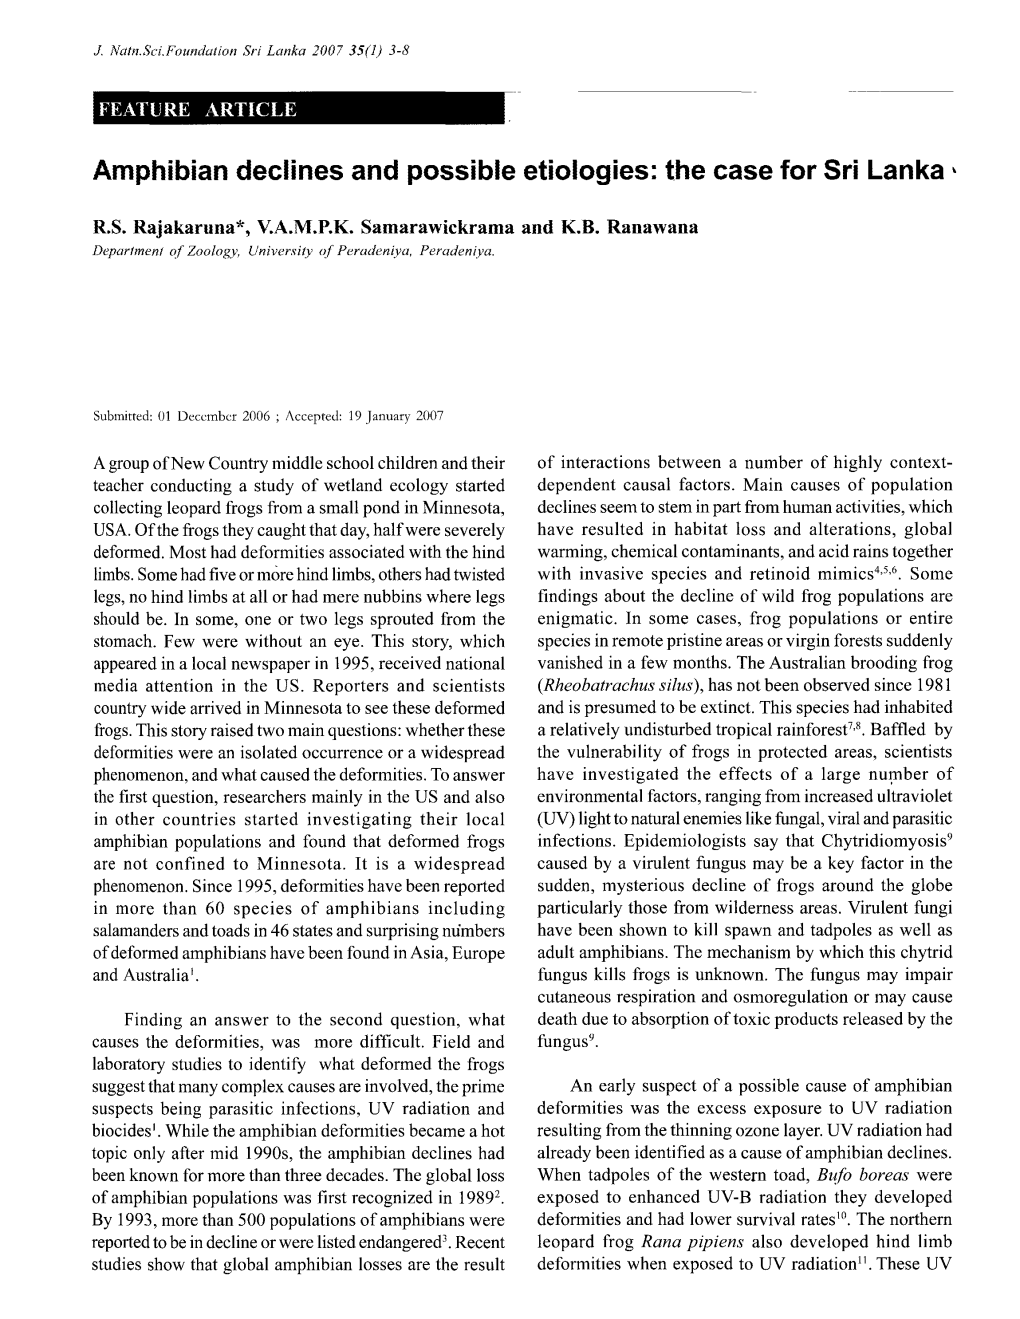 Amphibian Declines and Possible Etiologies: the Case for Sri Lanka *